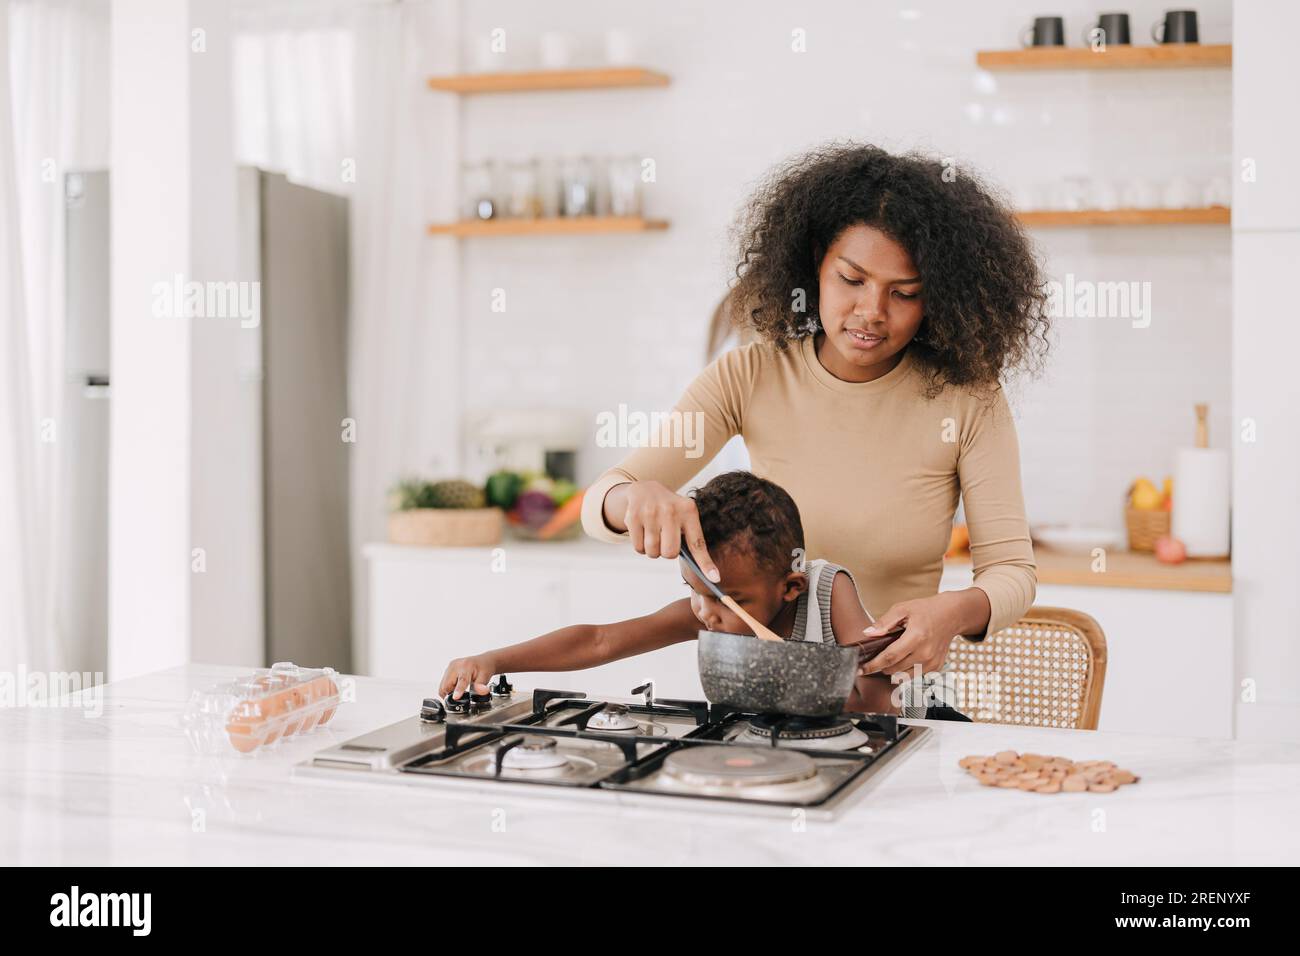 busy mom cooking food in kitchen stove island at home with playful naughtily kid boy lifestyle vintage tone Stock Photo